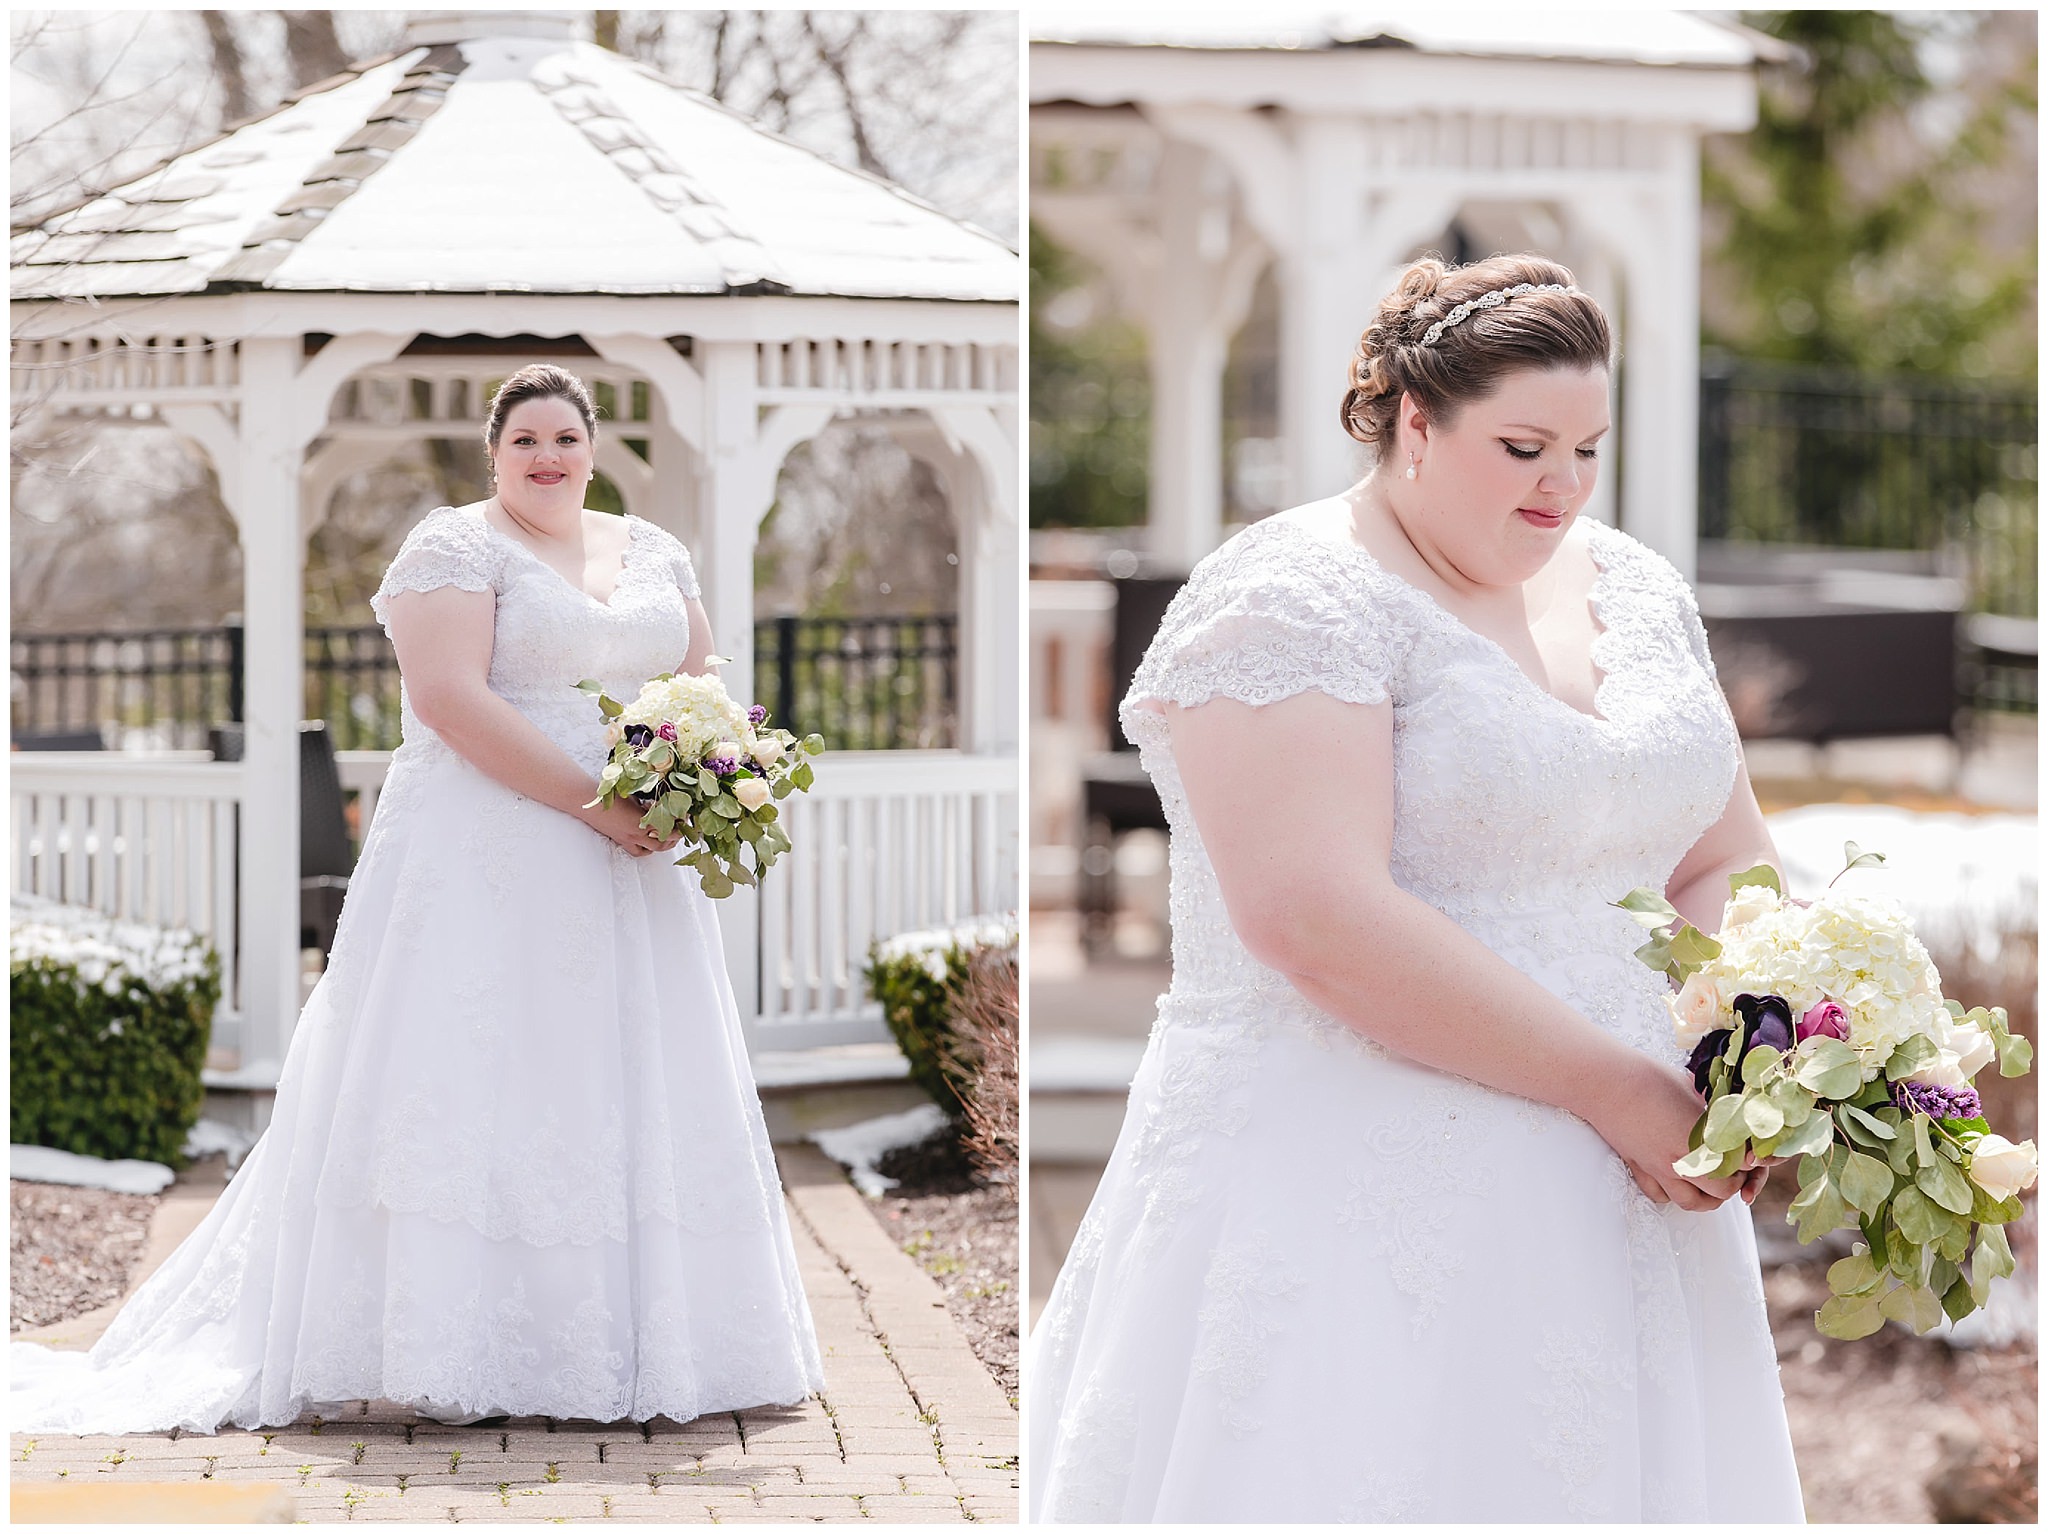 Bridal portrait by the gazebo at the DoubleTree in Moon Township